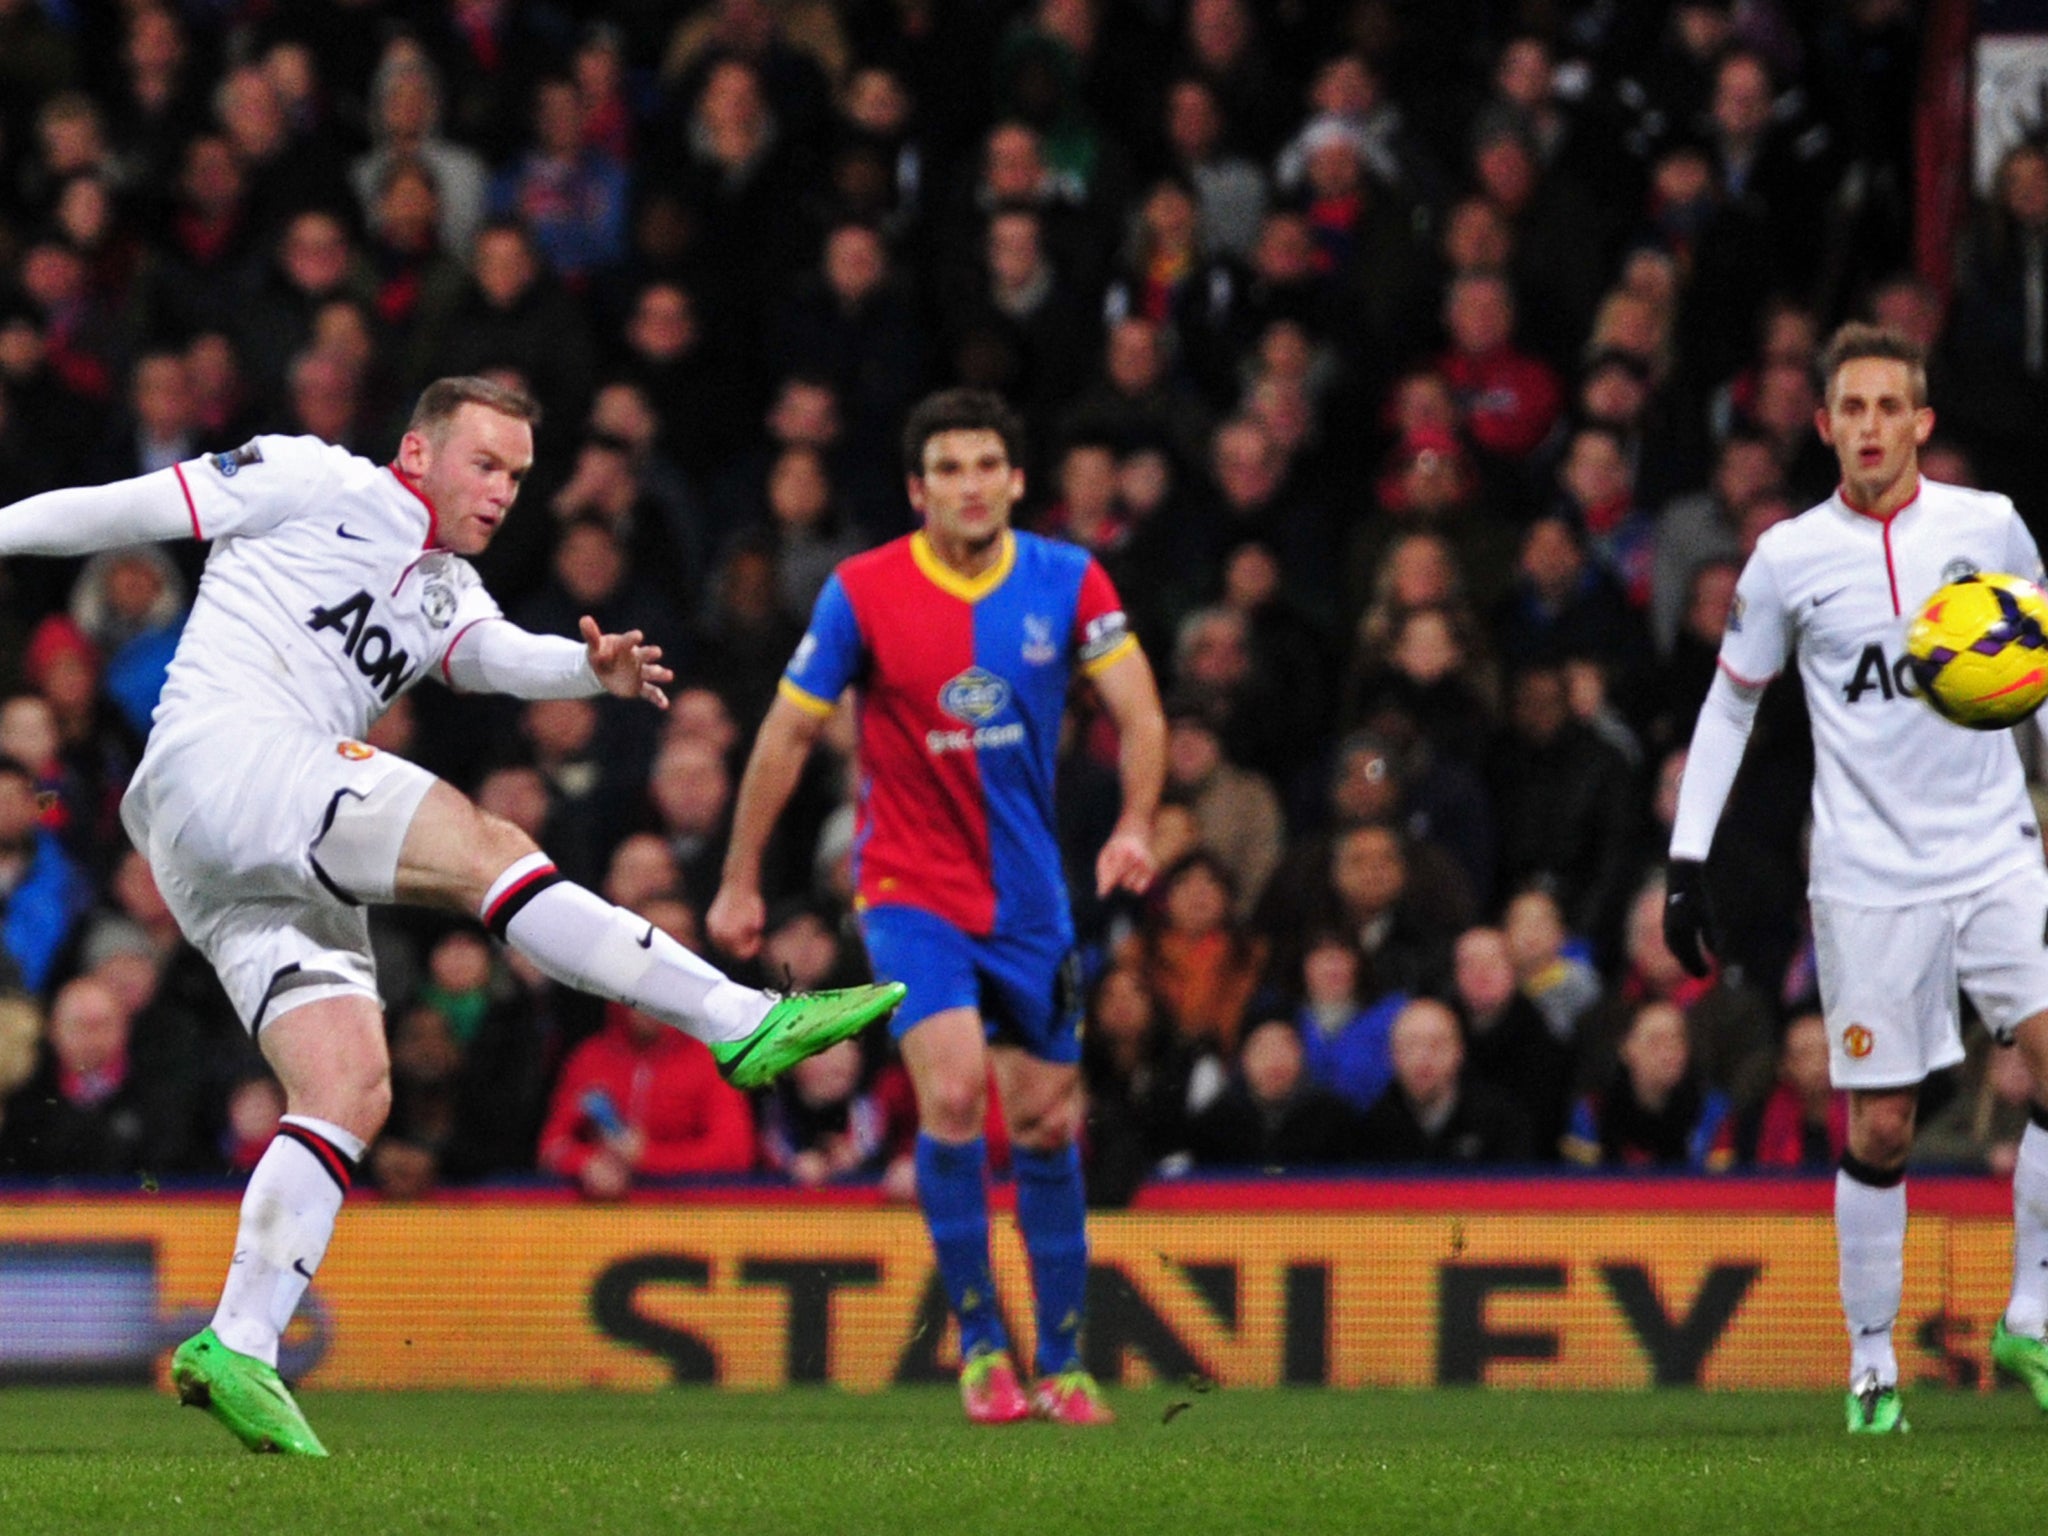 Wayne Rooney scores Manchester United's second in the 2-0 victory over Crystal Palace